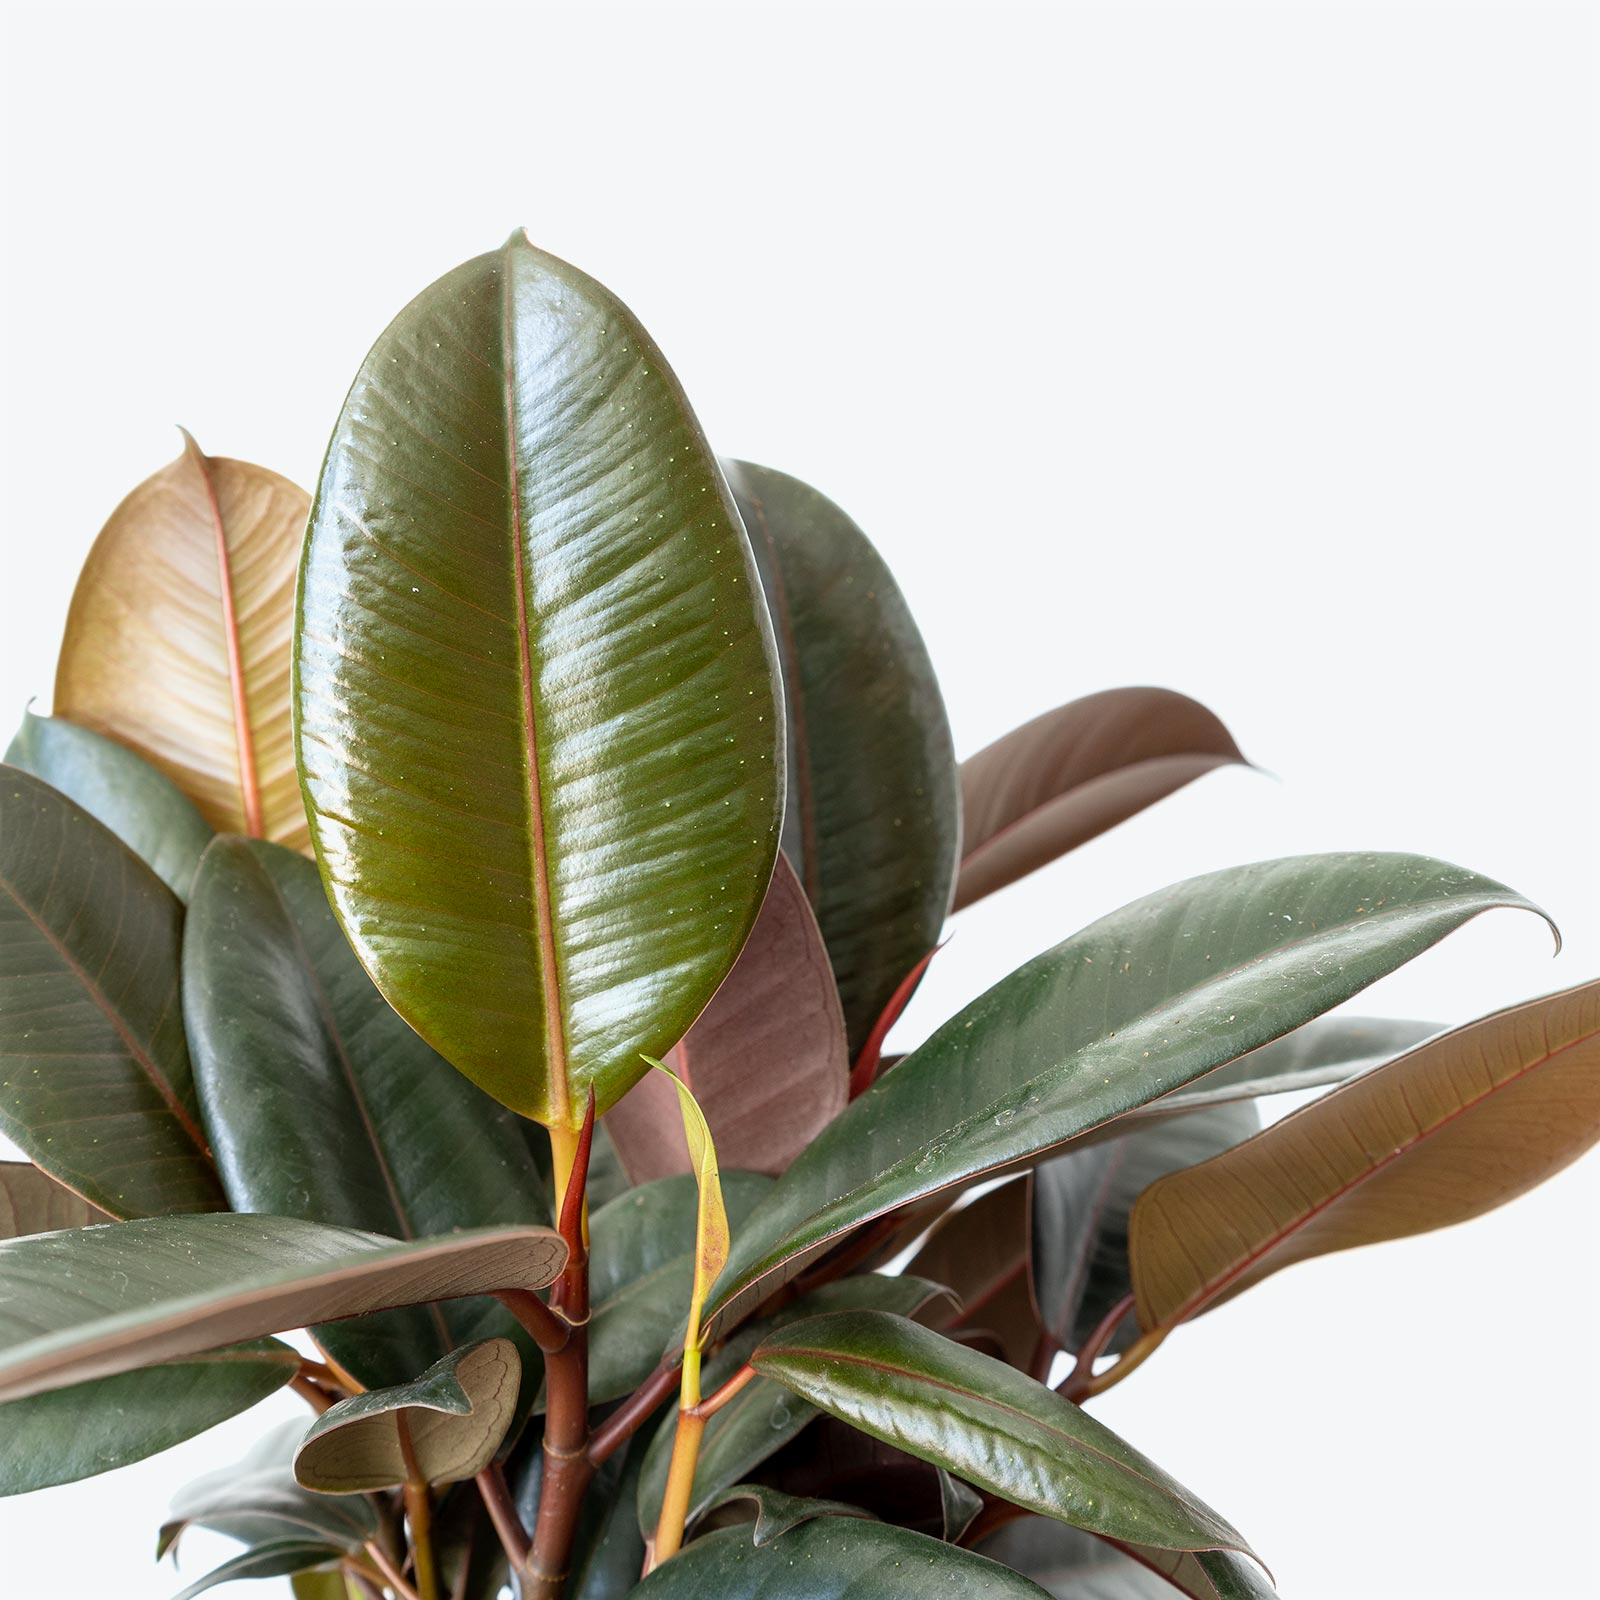 Buy Rubber Tree, Rubber Plant, Ficus elastica - Plant online from  Nurserylive at lowest price.